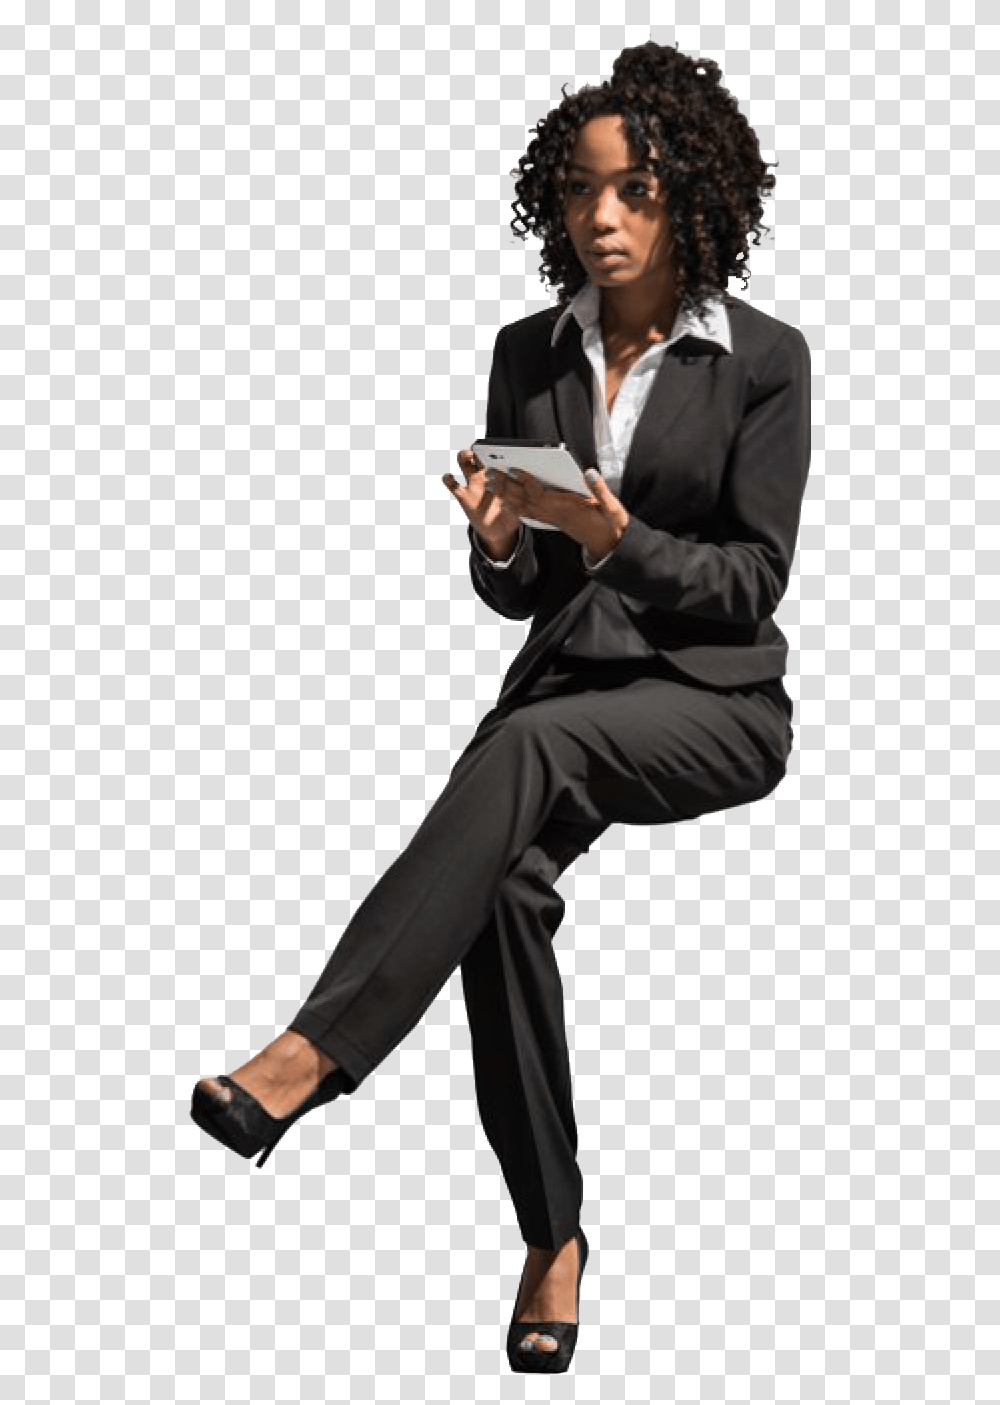 Cutout Woman Sitting People Business People Sitting, Clothing, Suit, Overcoat, Person Transparent Png